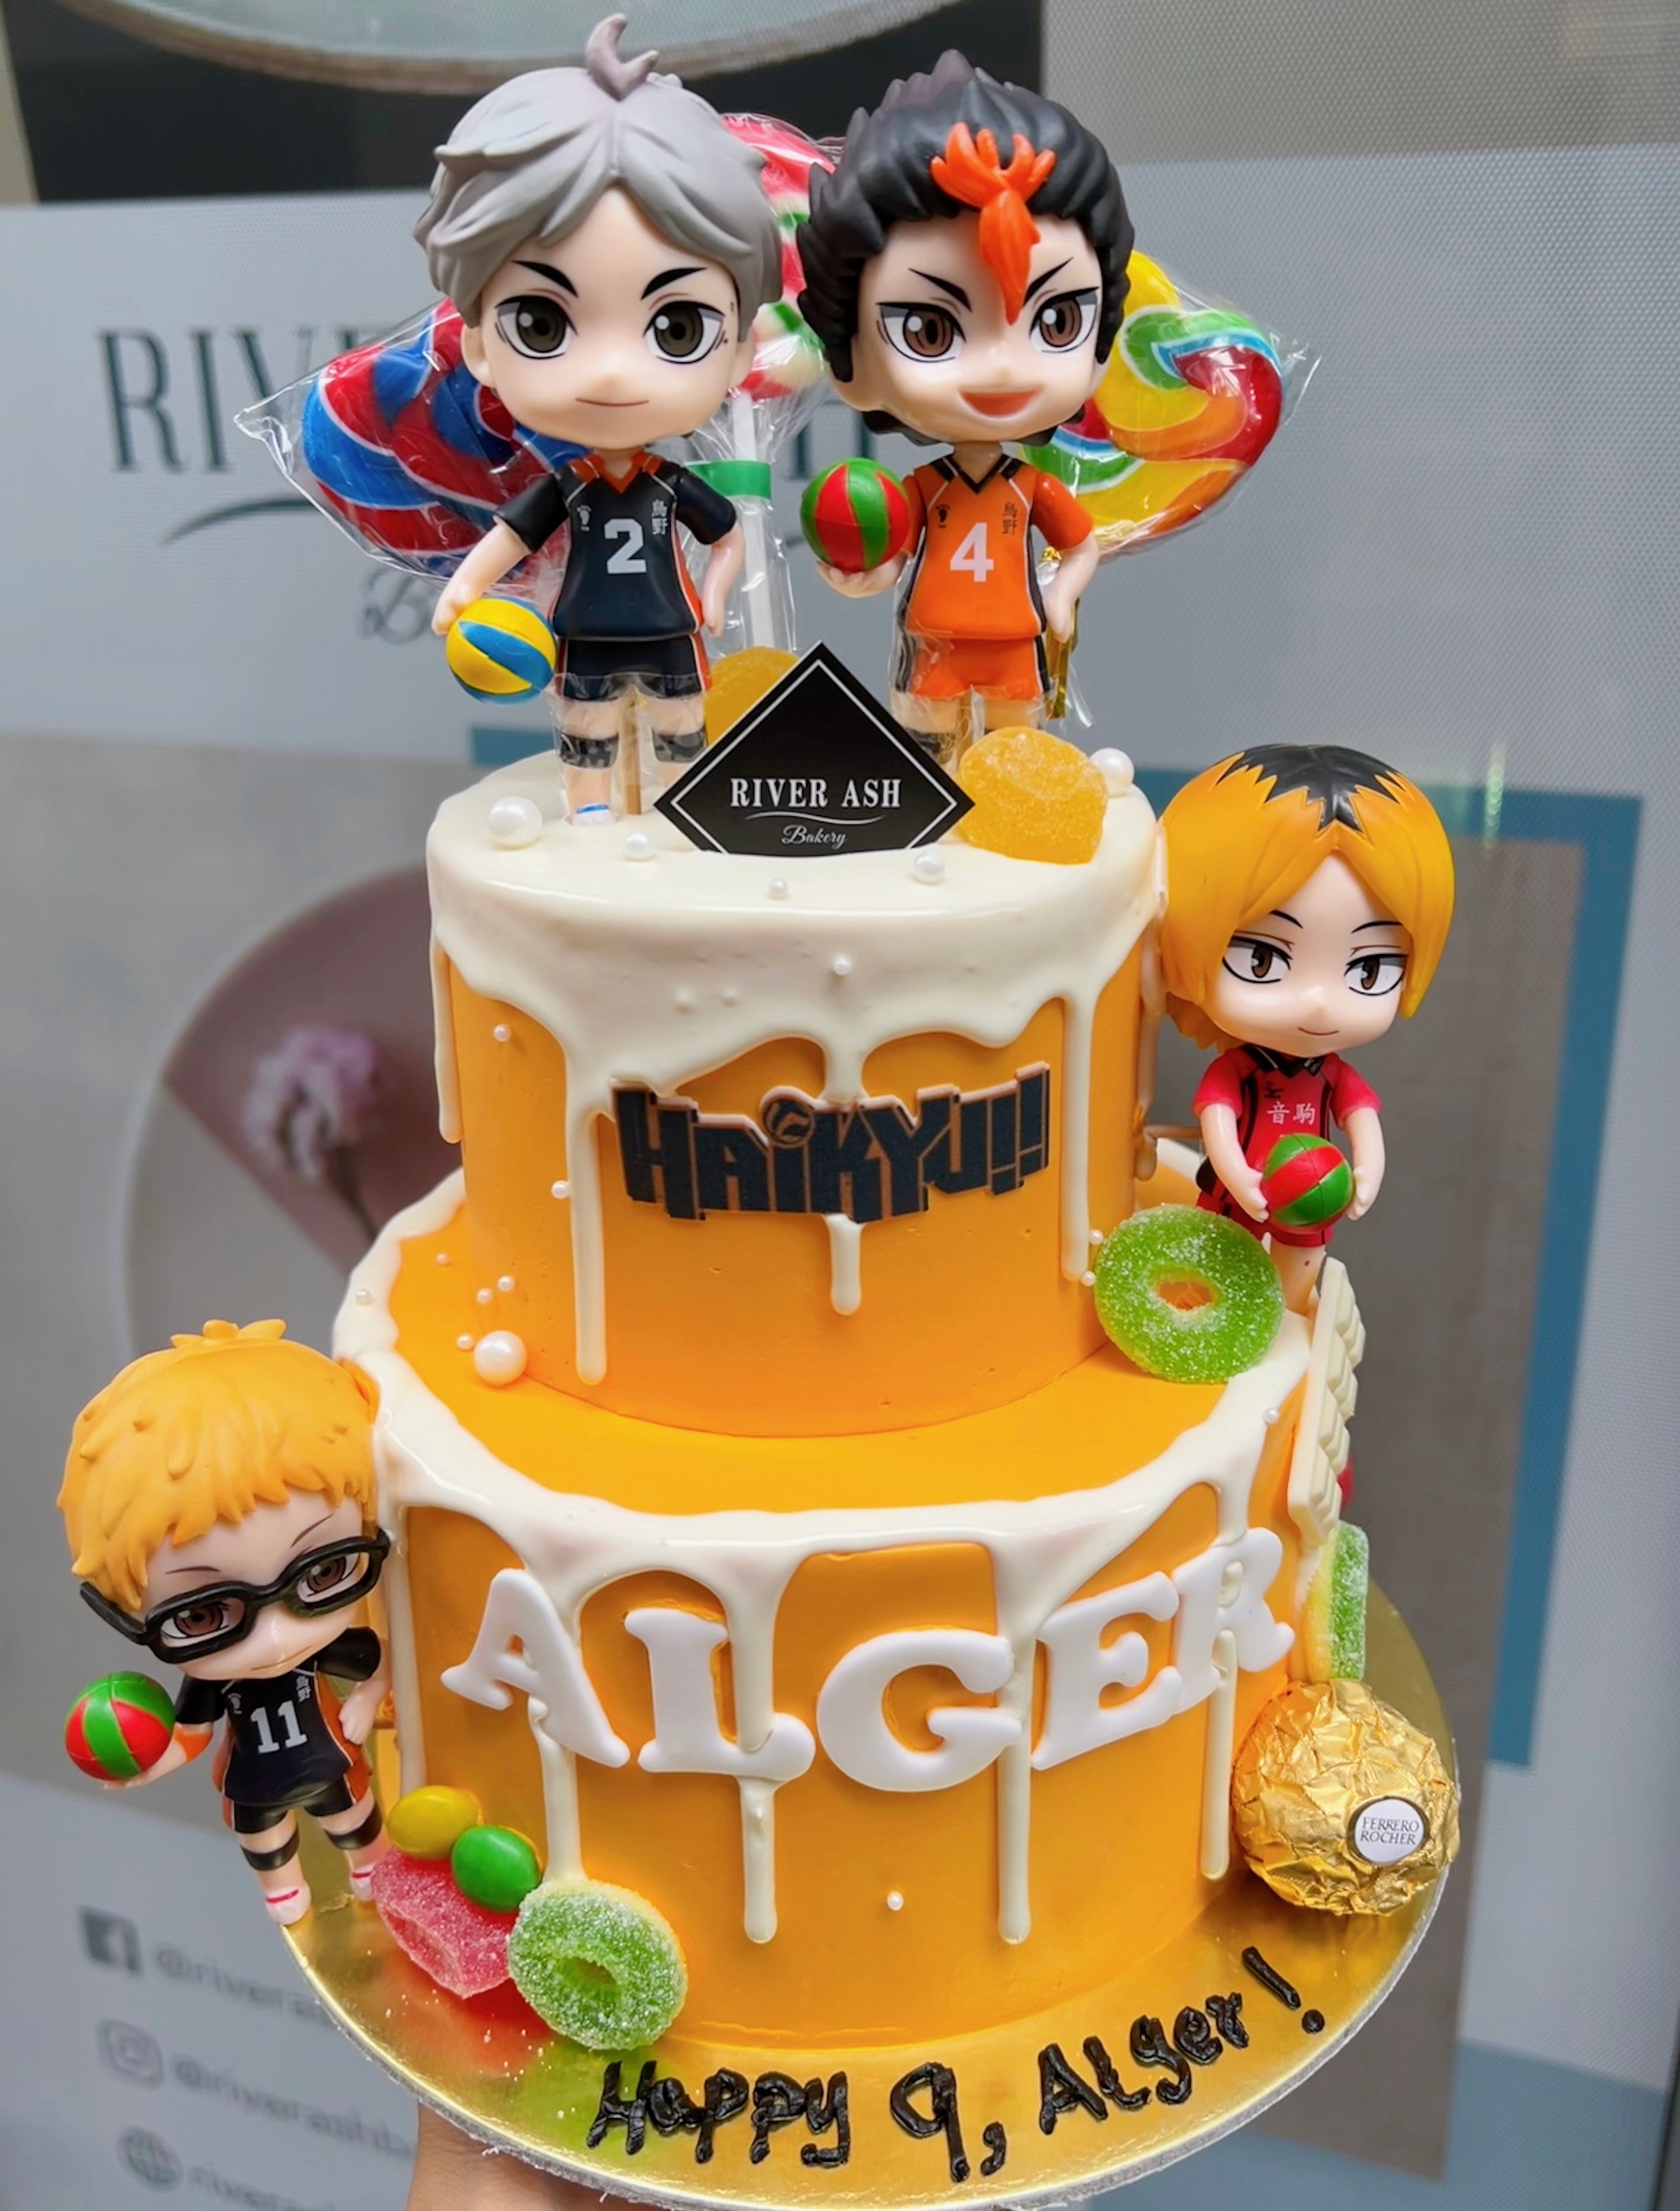 Not Your Grandmother's Birthday Cake, Torte Bakery in Gunma Churns Out Some  Amazing Anime Cakes | SoraNews24 -Japan News-